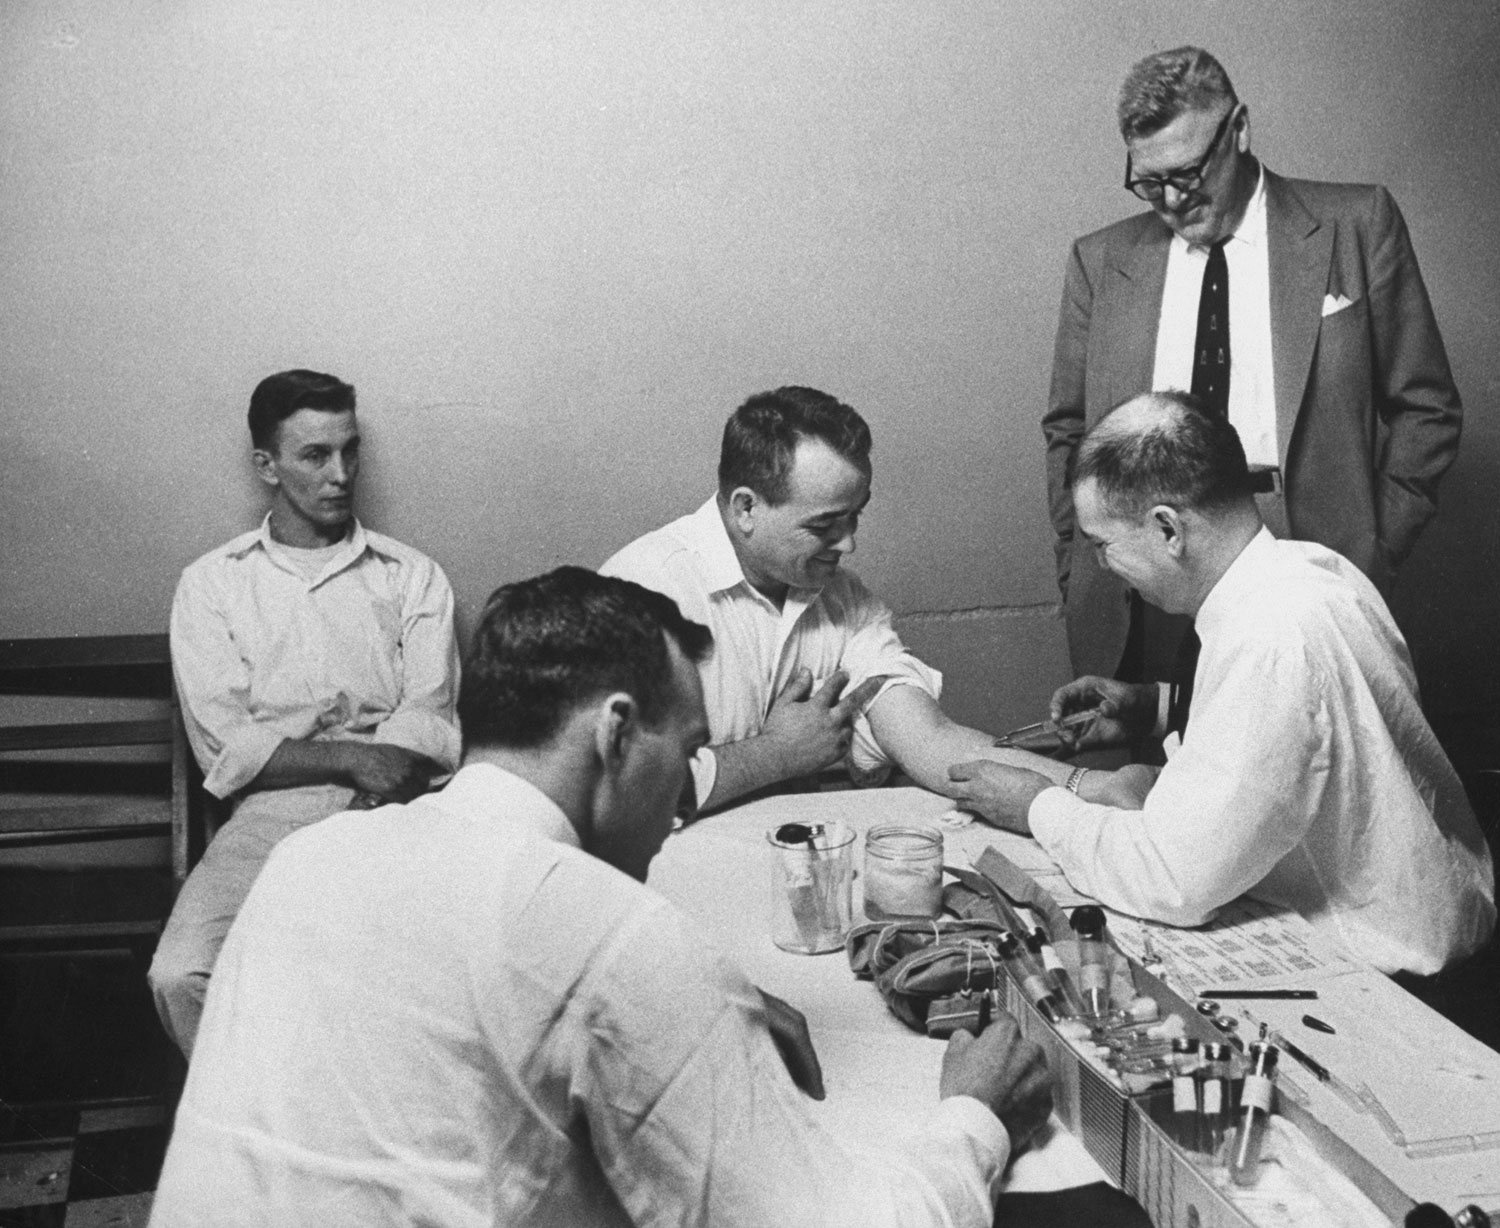 Doctors at Ohio State Penitentiary inject living cancerous cells into a prisoner's arm to test natural immunity, 1958.